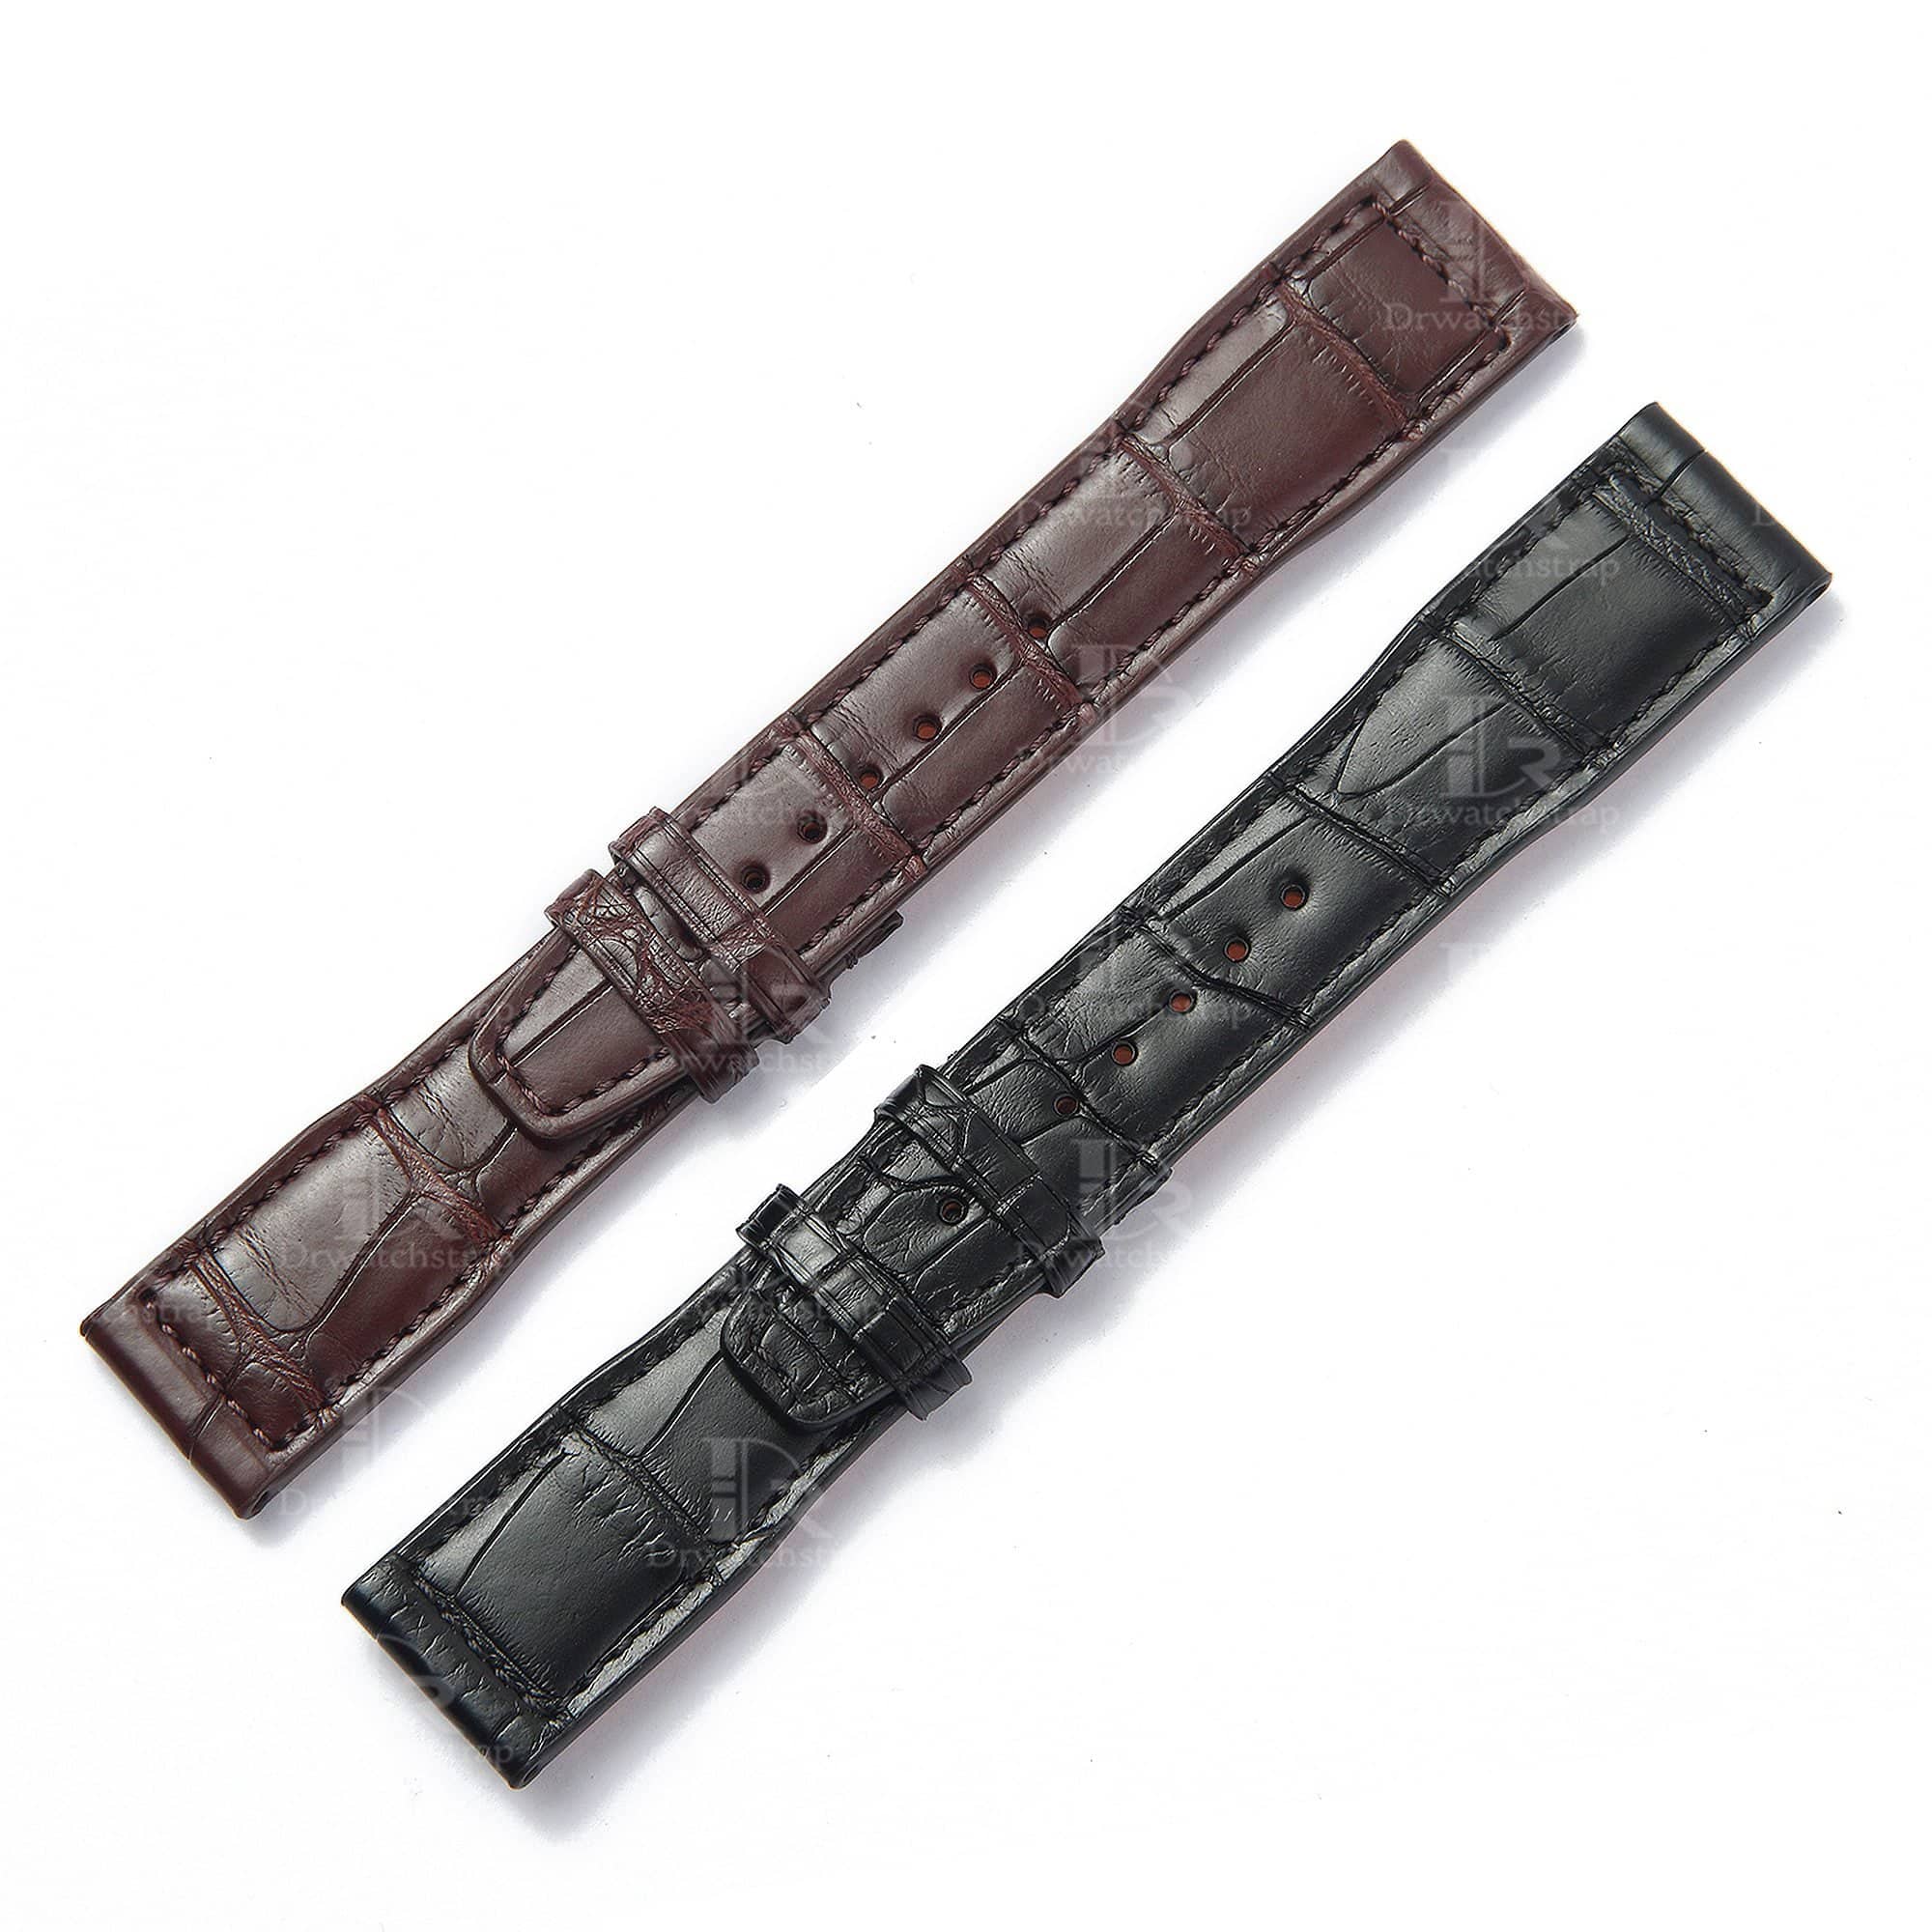 Custom best quality handmade black brown alligator crocodile 20mm 21mm leather IWC watch straps and watch bands replacement for IWC Pilot's watch Mark XVIII Chronograph - shop the grade A crocodile leather watchbands online